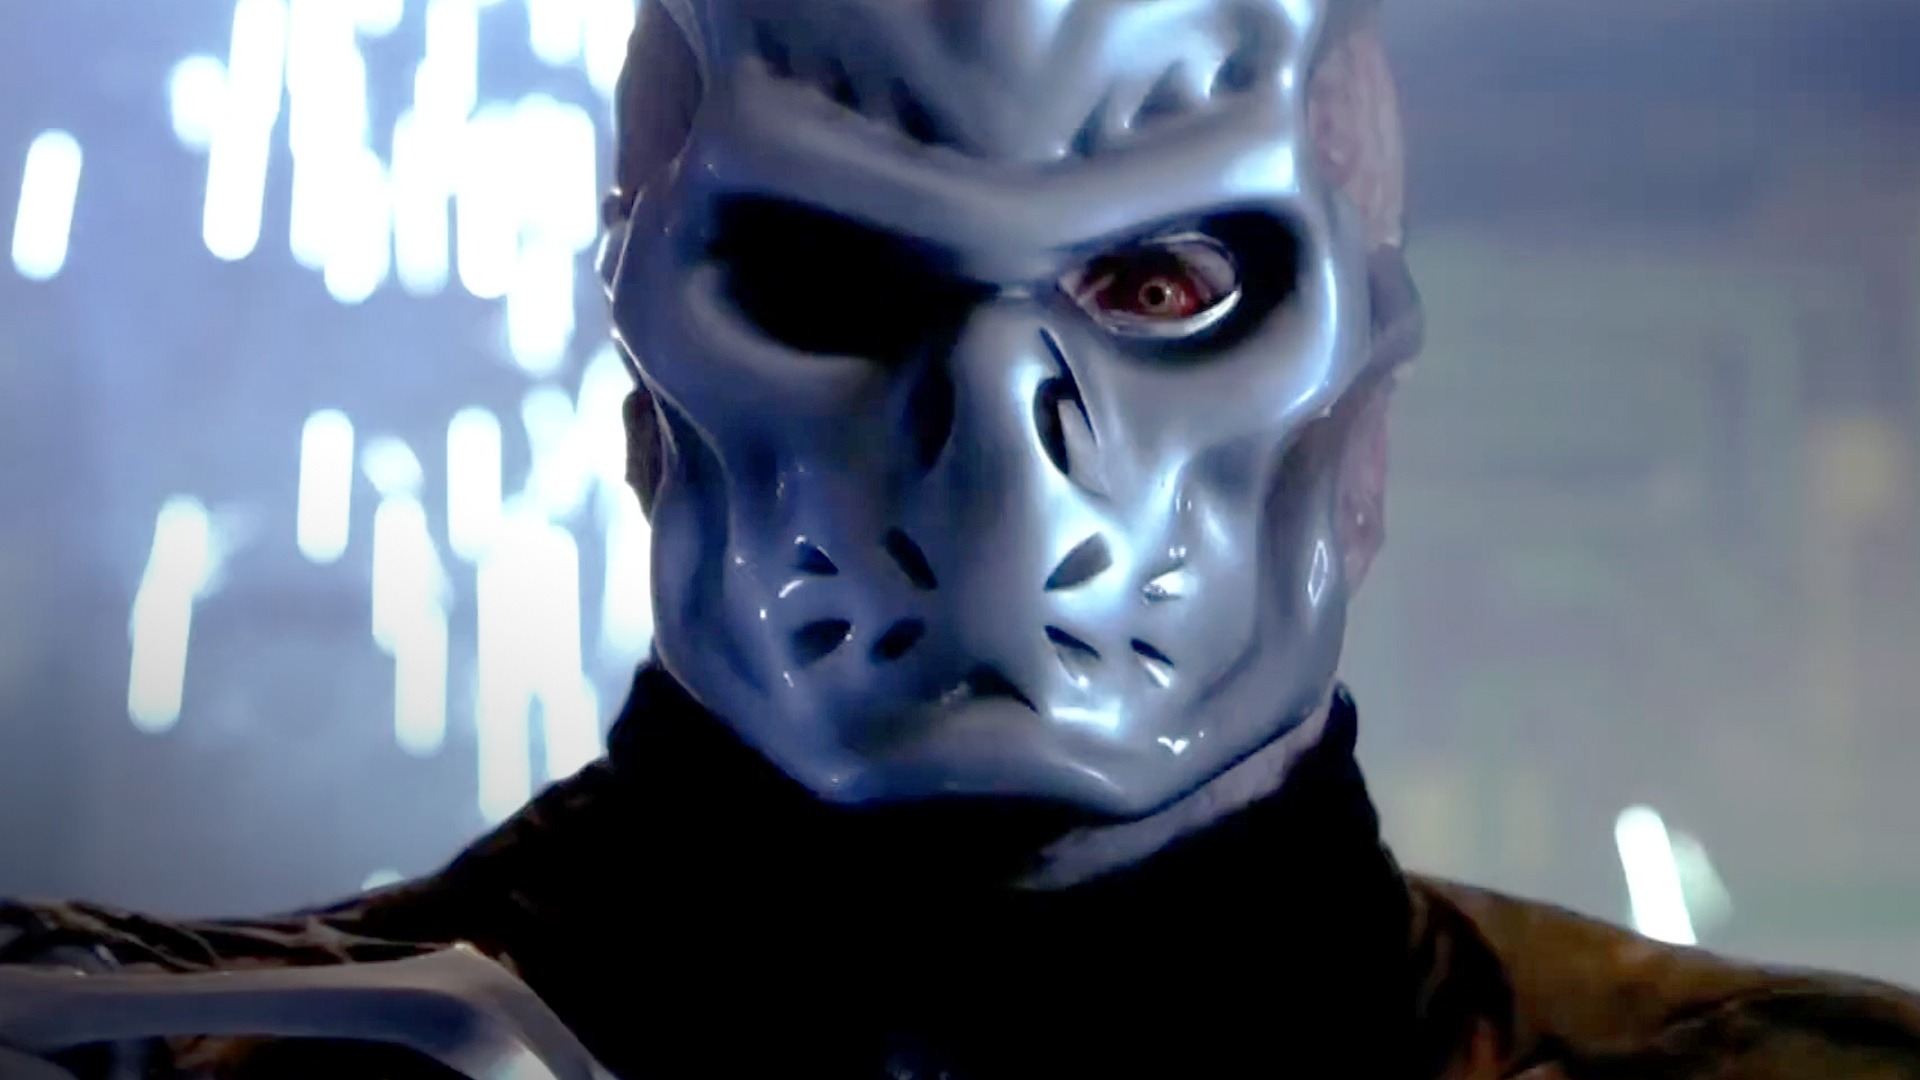 Jason X Trailer 1 Trailers And Videos Rotten Tomatoes